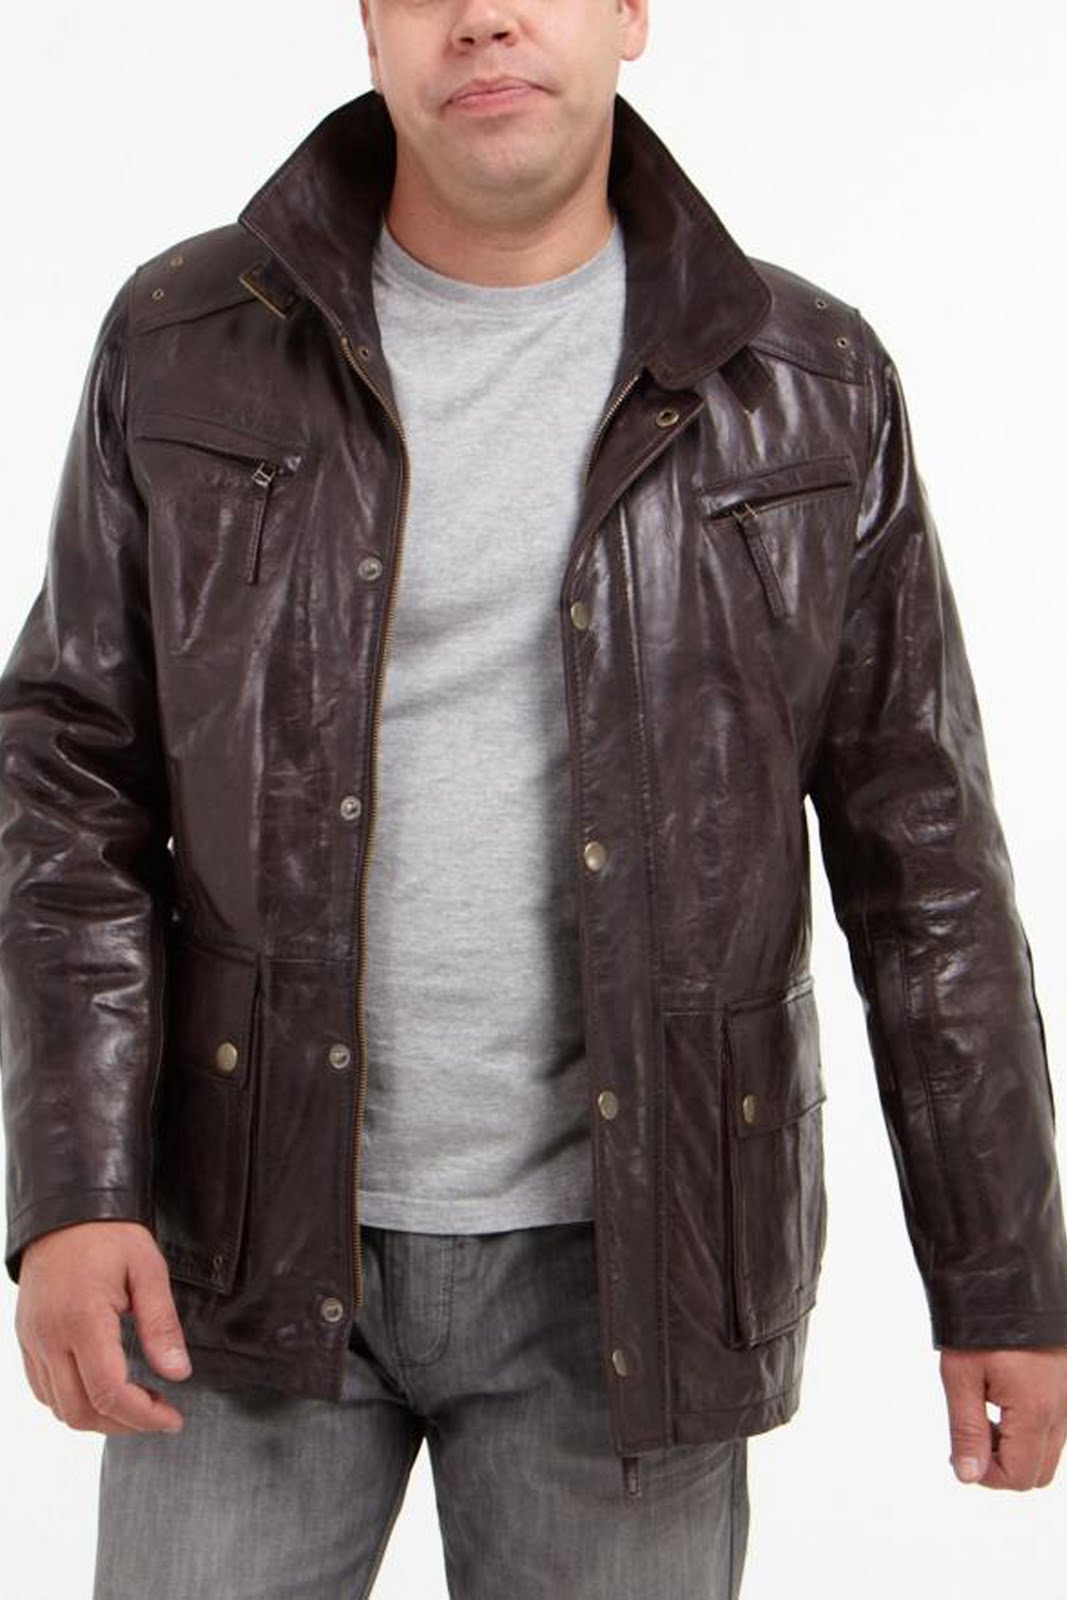 JLG Leather Ltd: The Best In Style And Function With Leather Jackets.